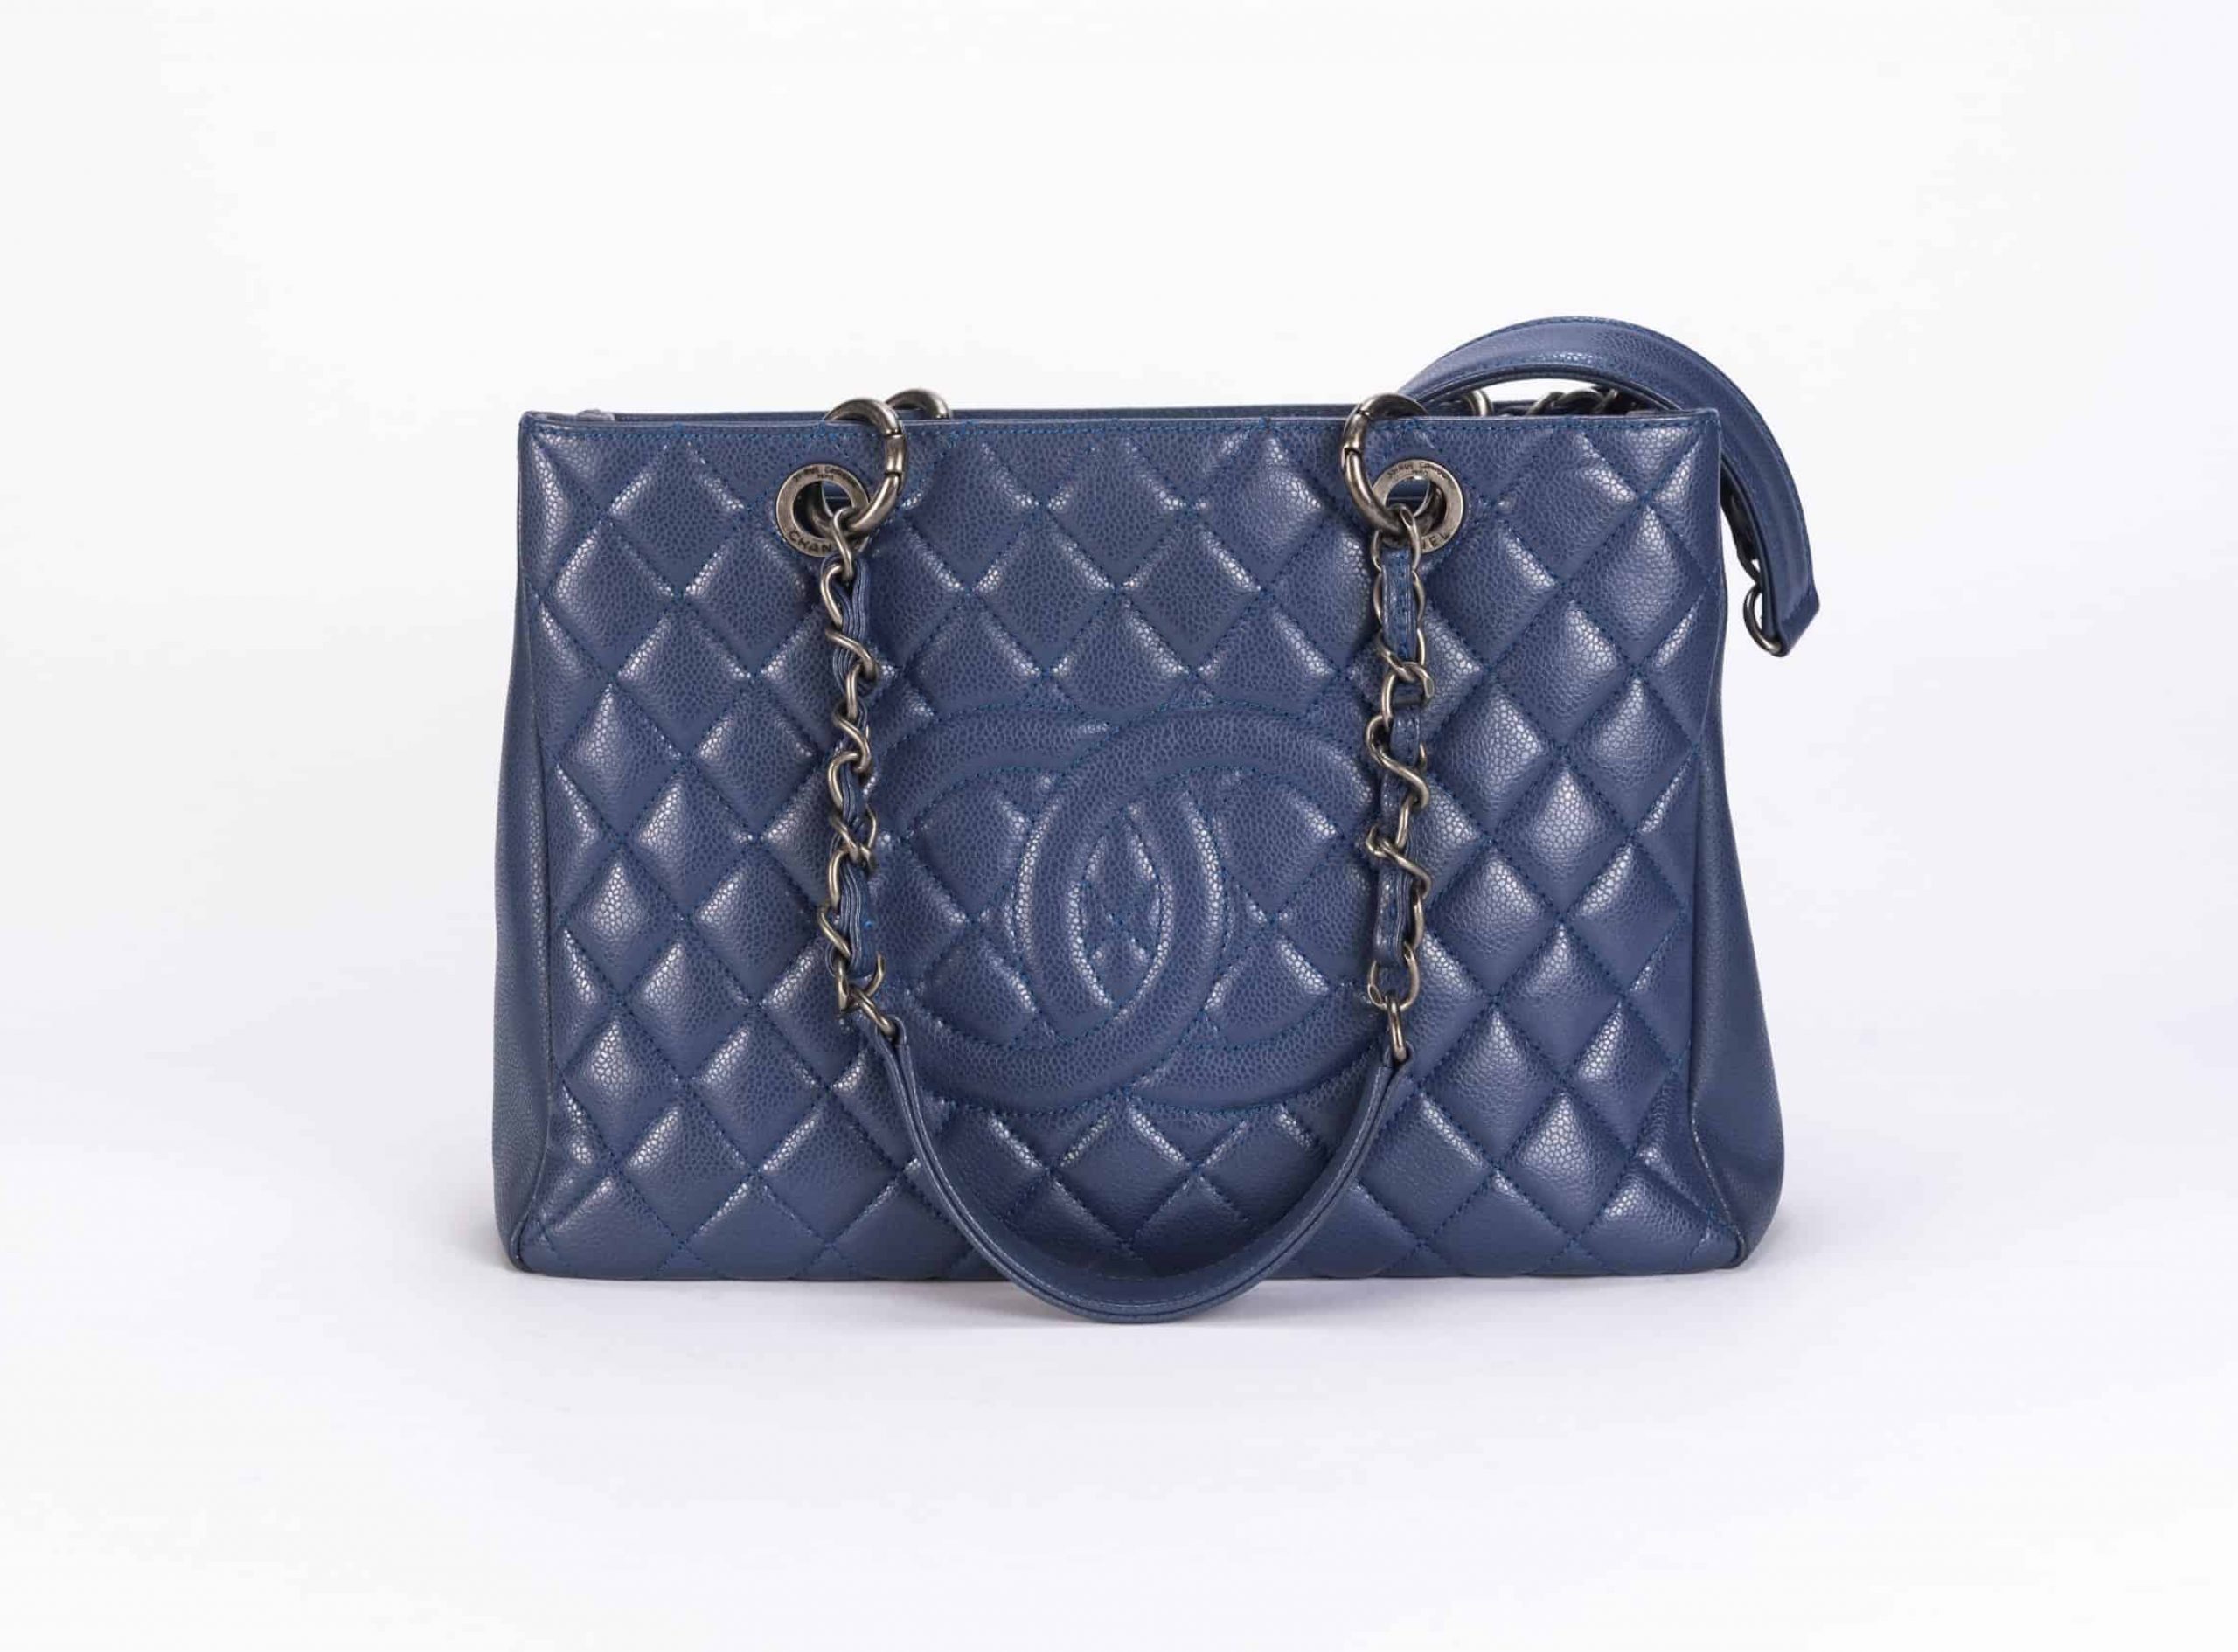 Chanel GST Caviar Quilted Bag in Royal Blue with Rhodium Hardware - 1